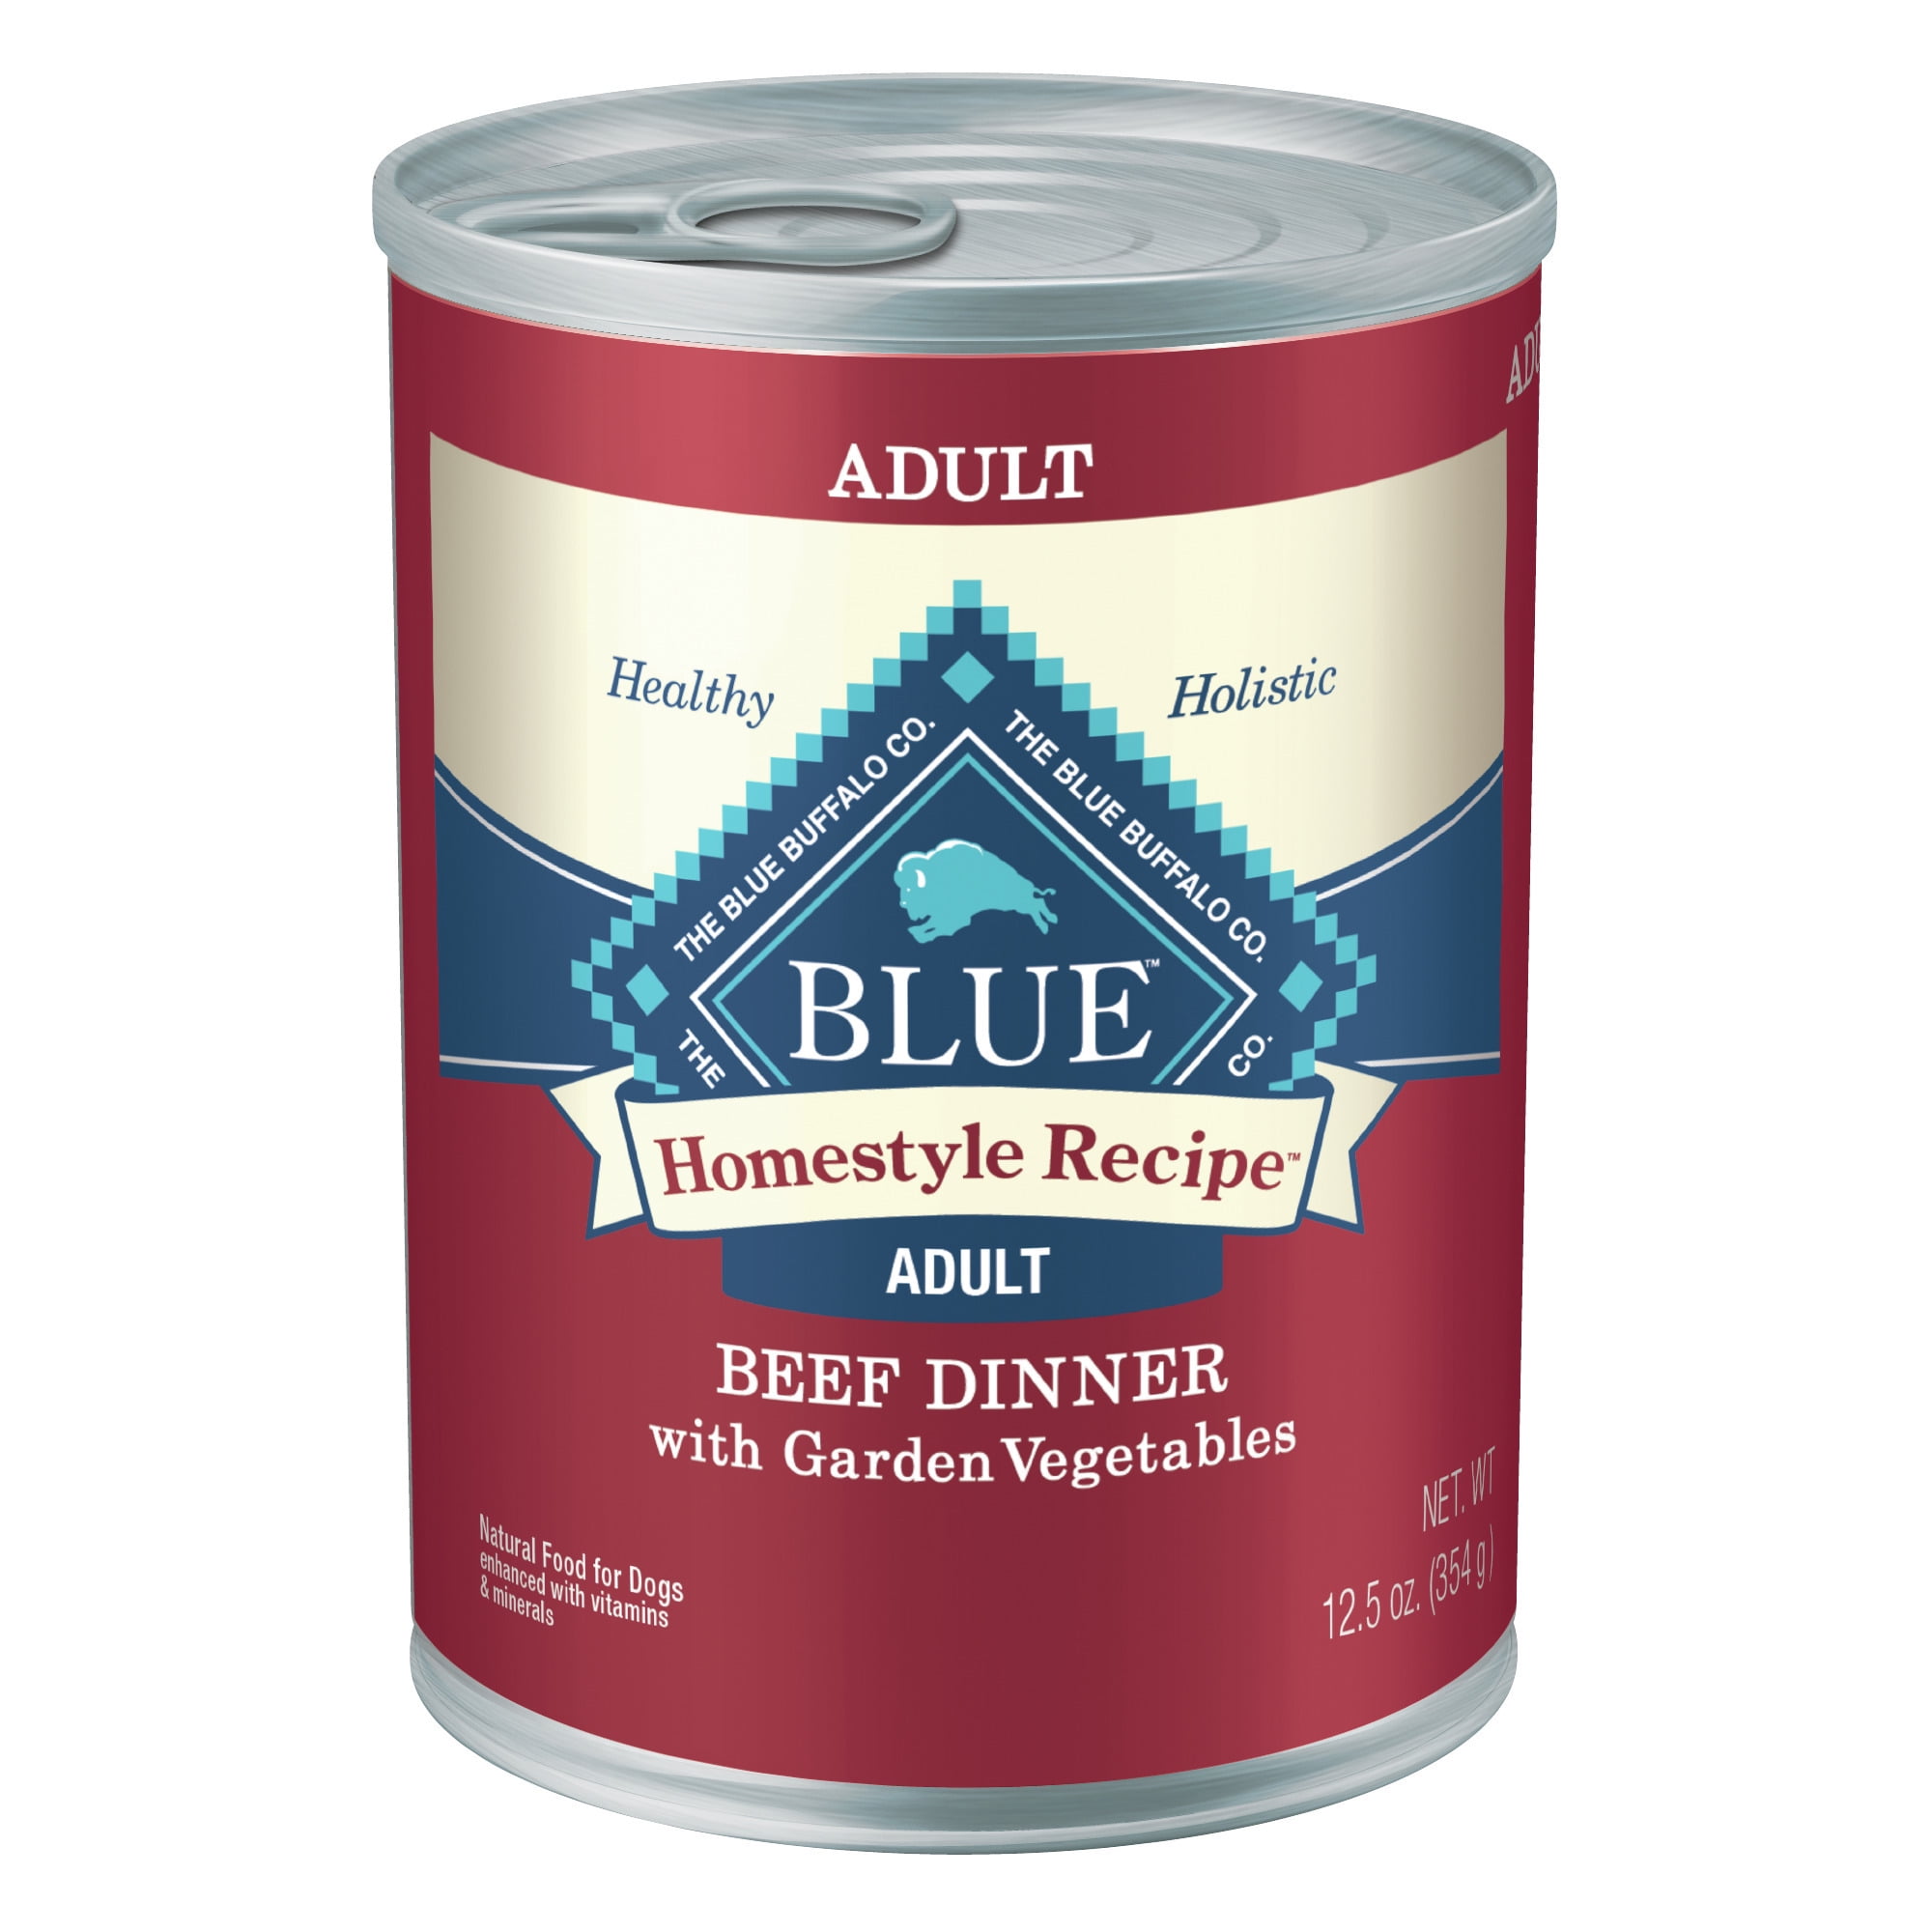 Blue Buffalo Homestyle Recipe Beef Pate Wet Dog Food for Adult Dogs, Whole Grain, 12.5 oz. Can